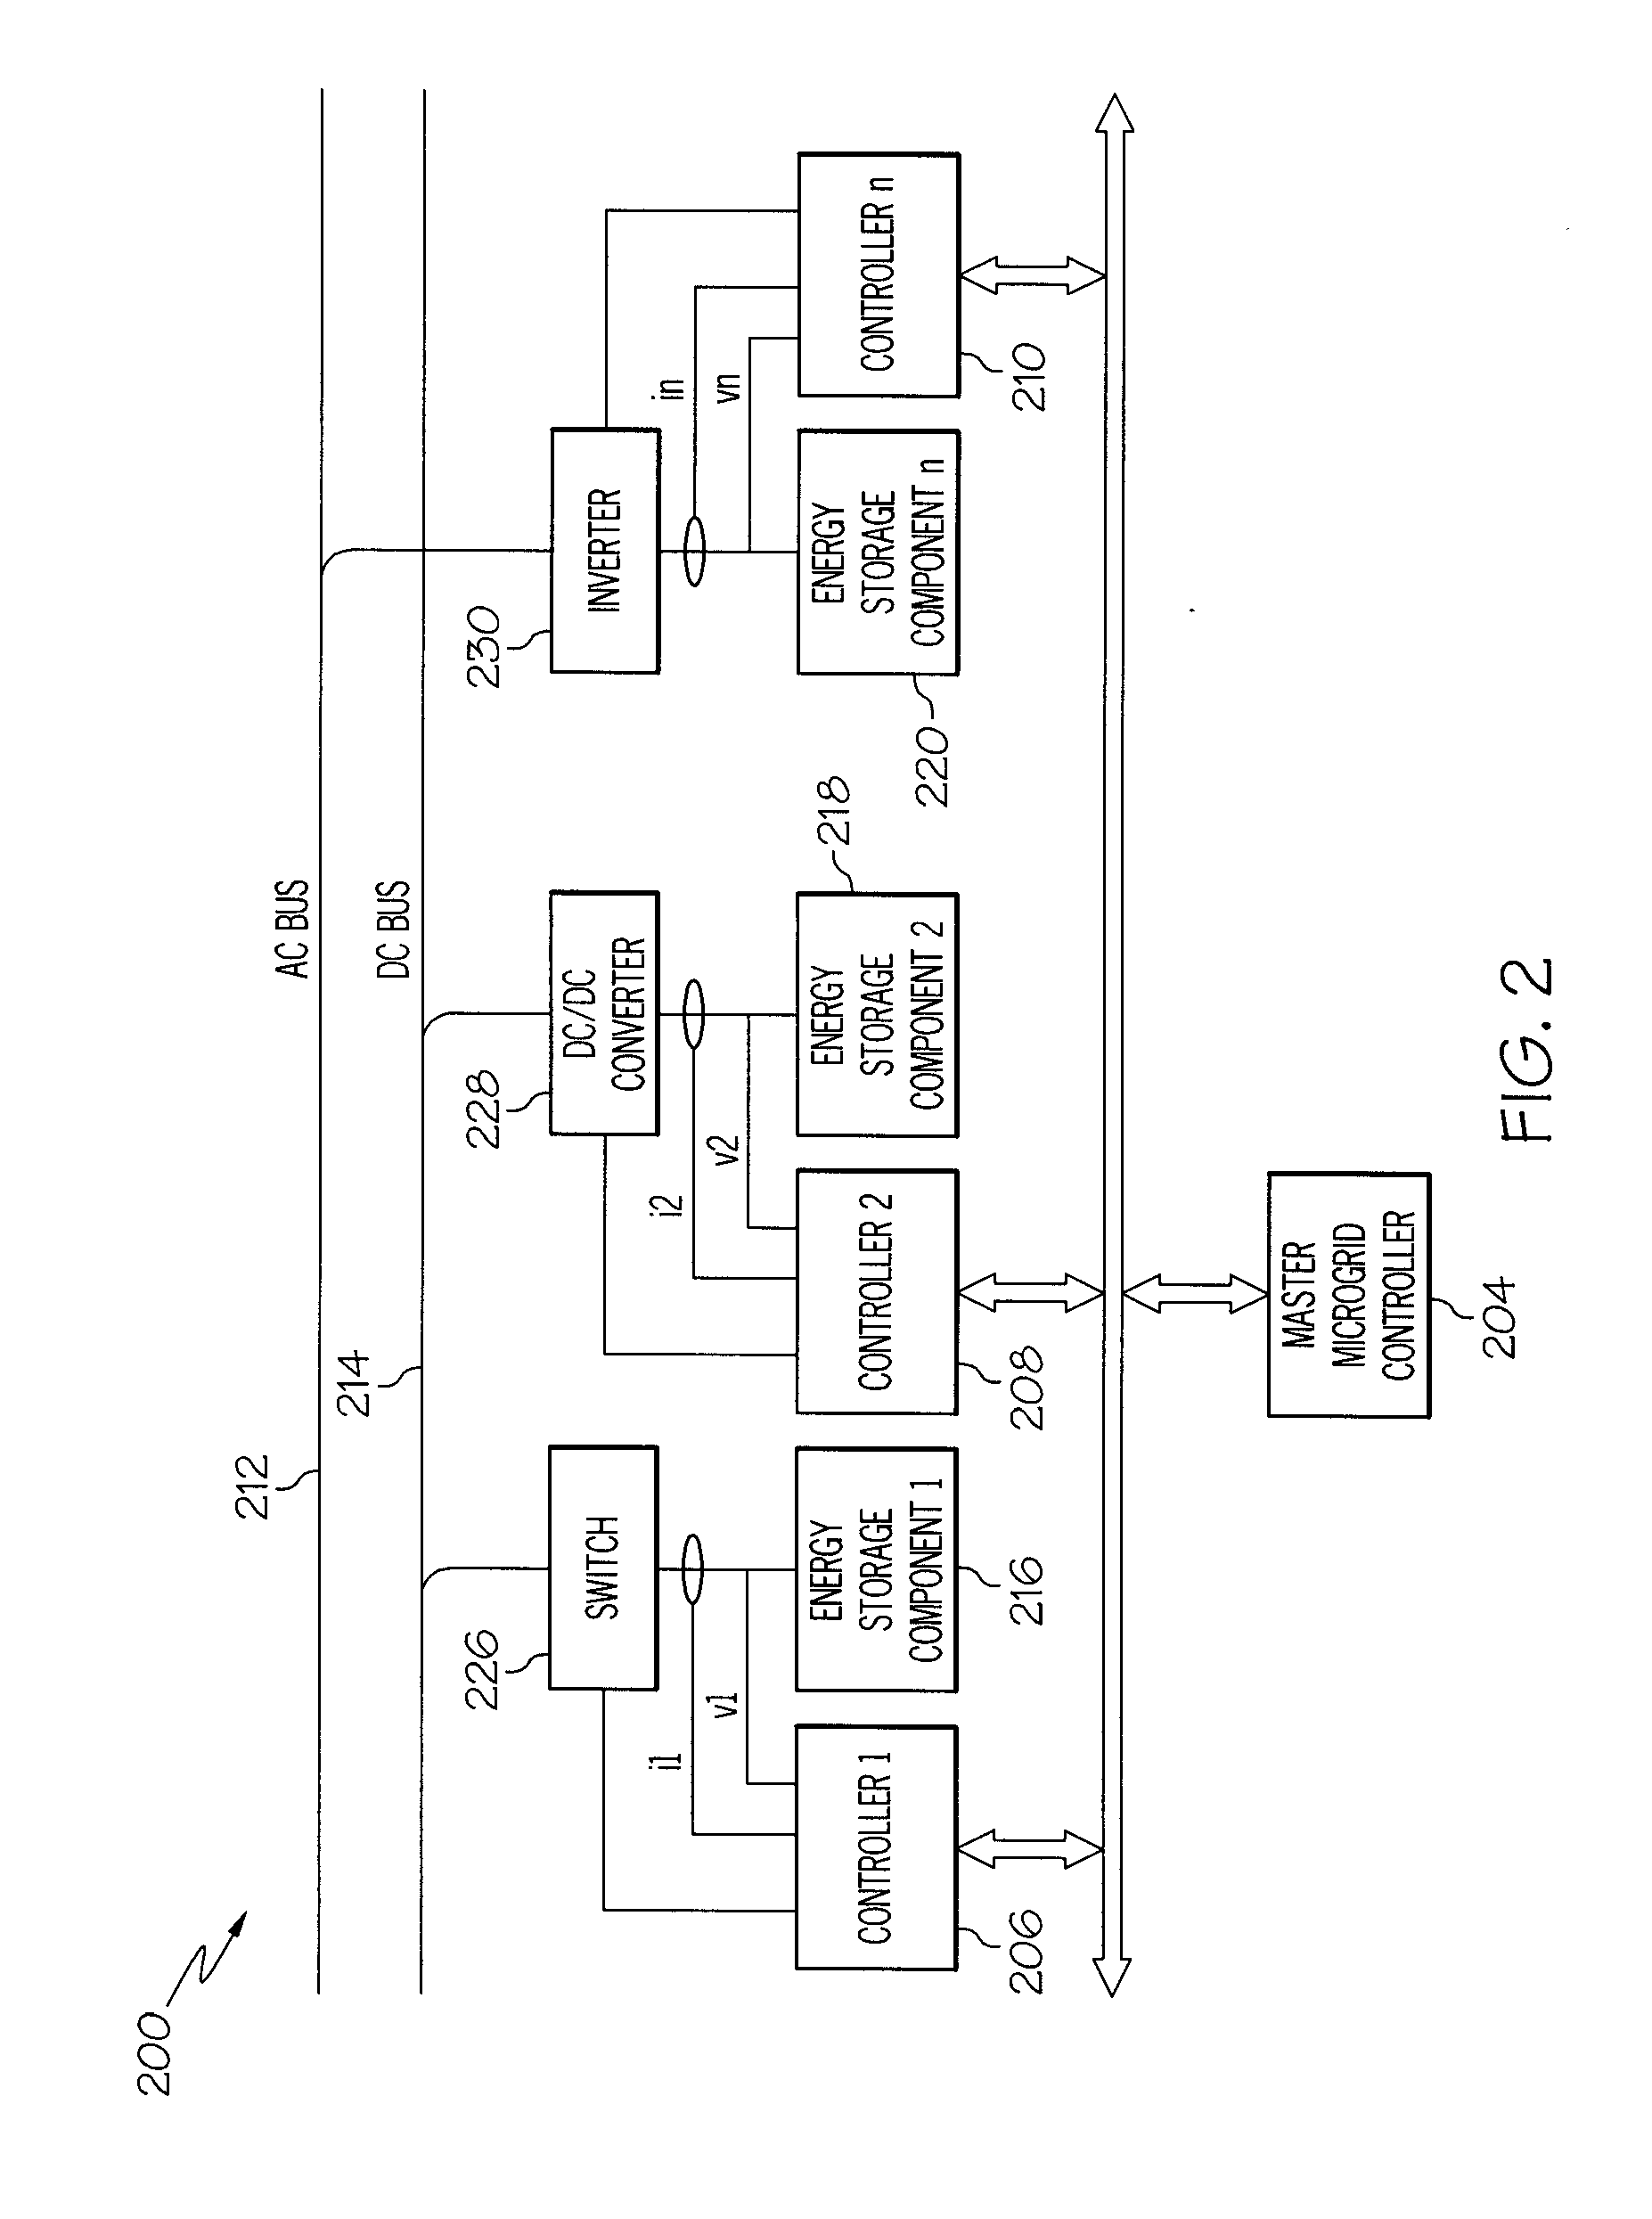 Method and apparatus for effective utilization of energy storage components within a microgid